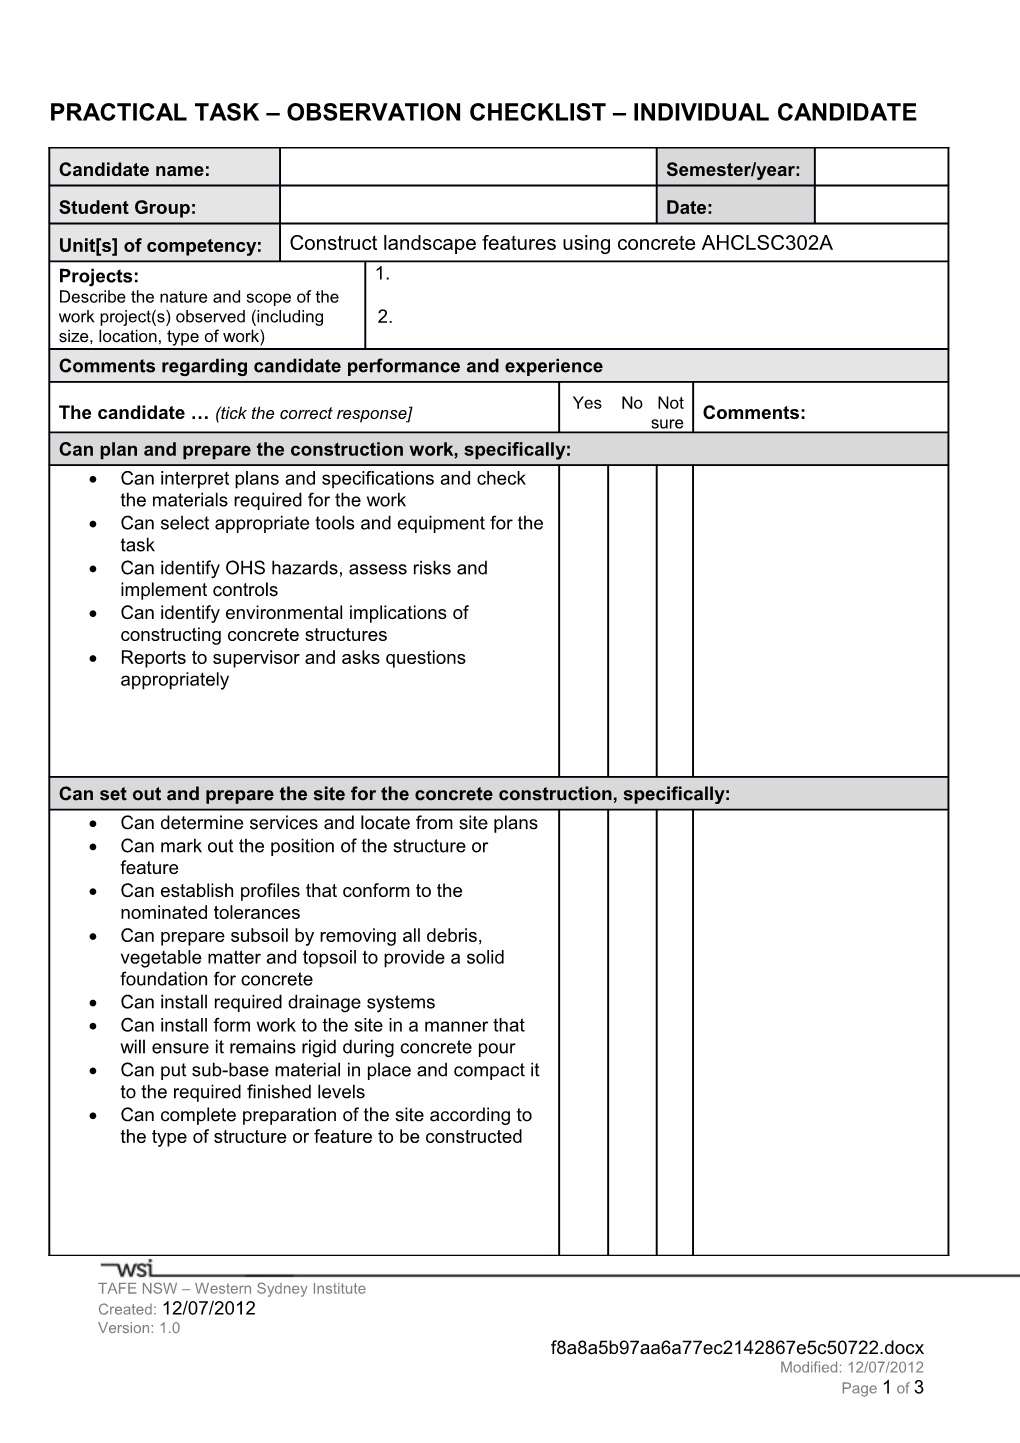 Practical Task Observation Checklist Individual Candidate